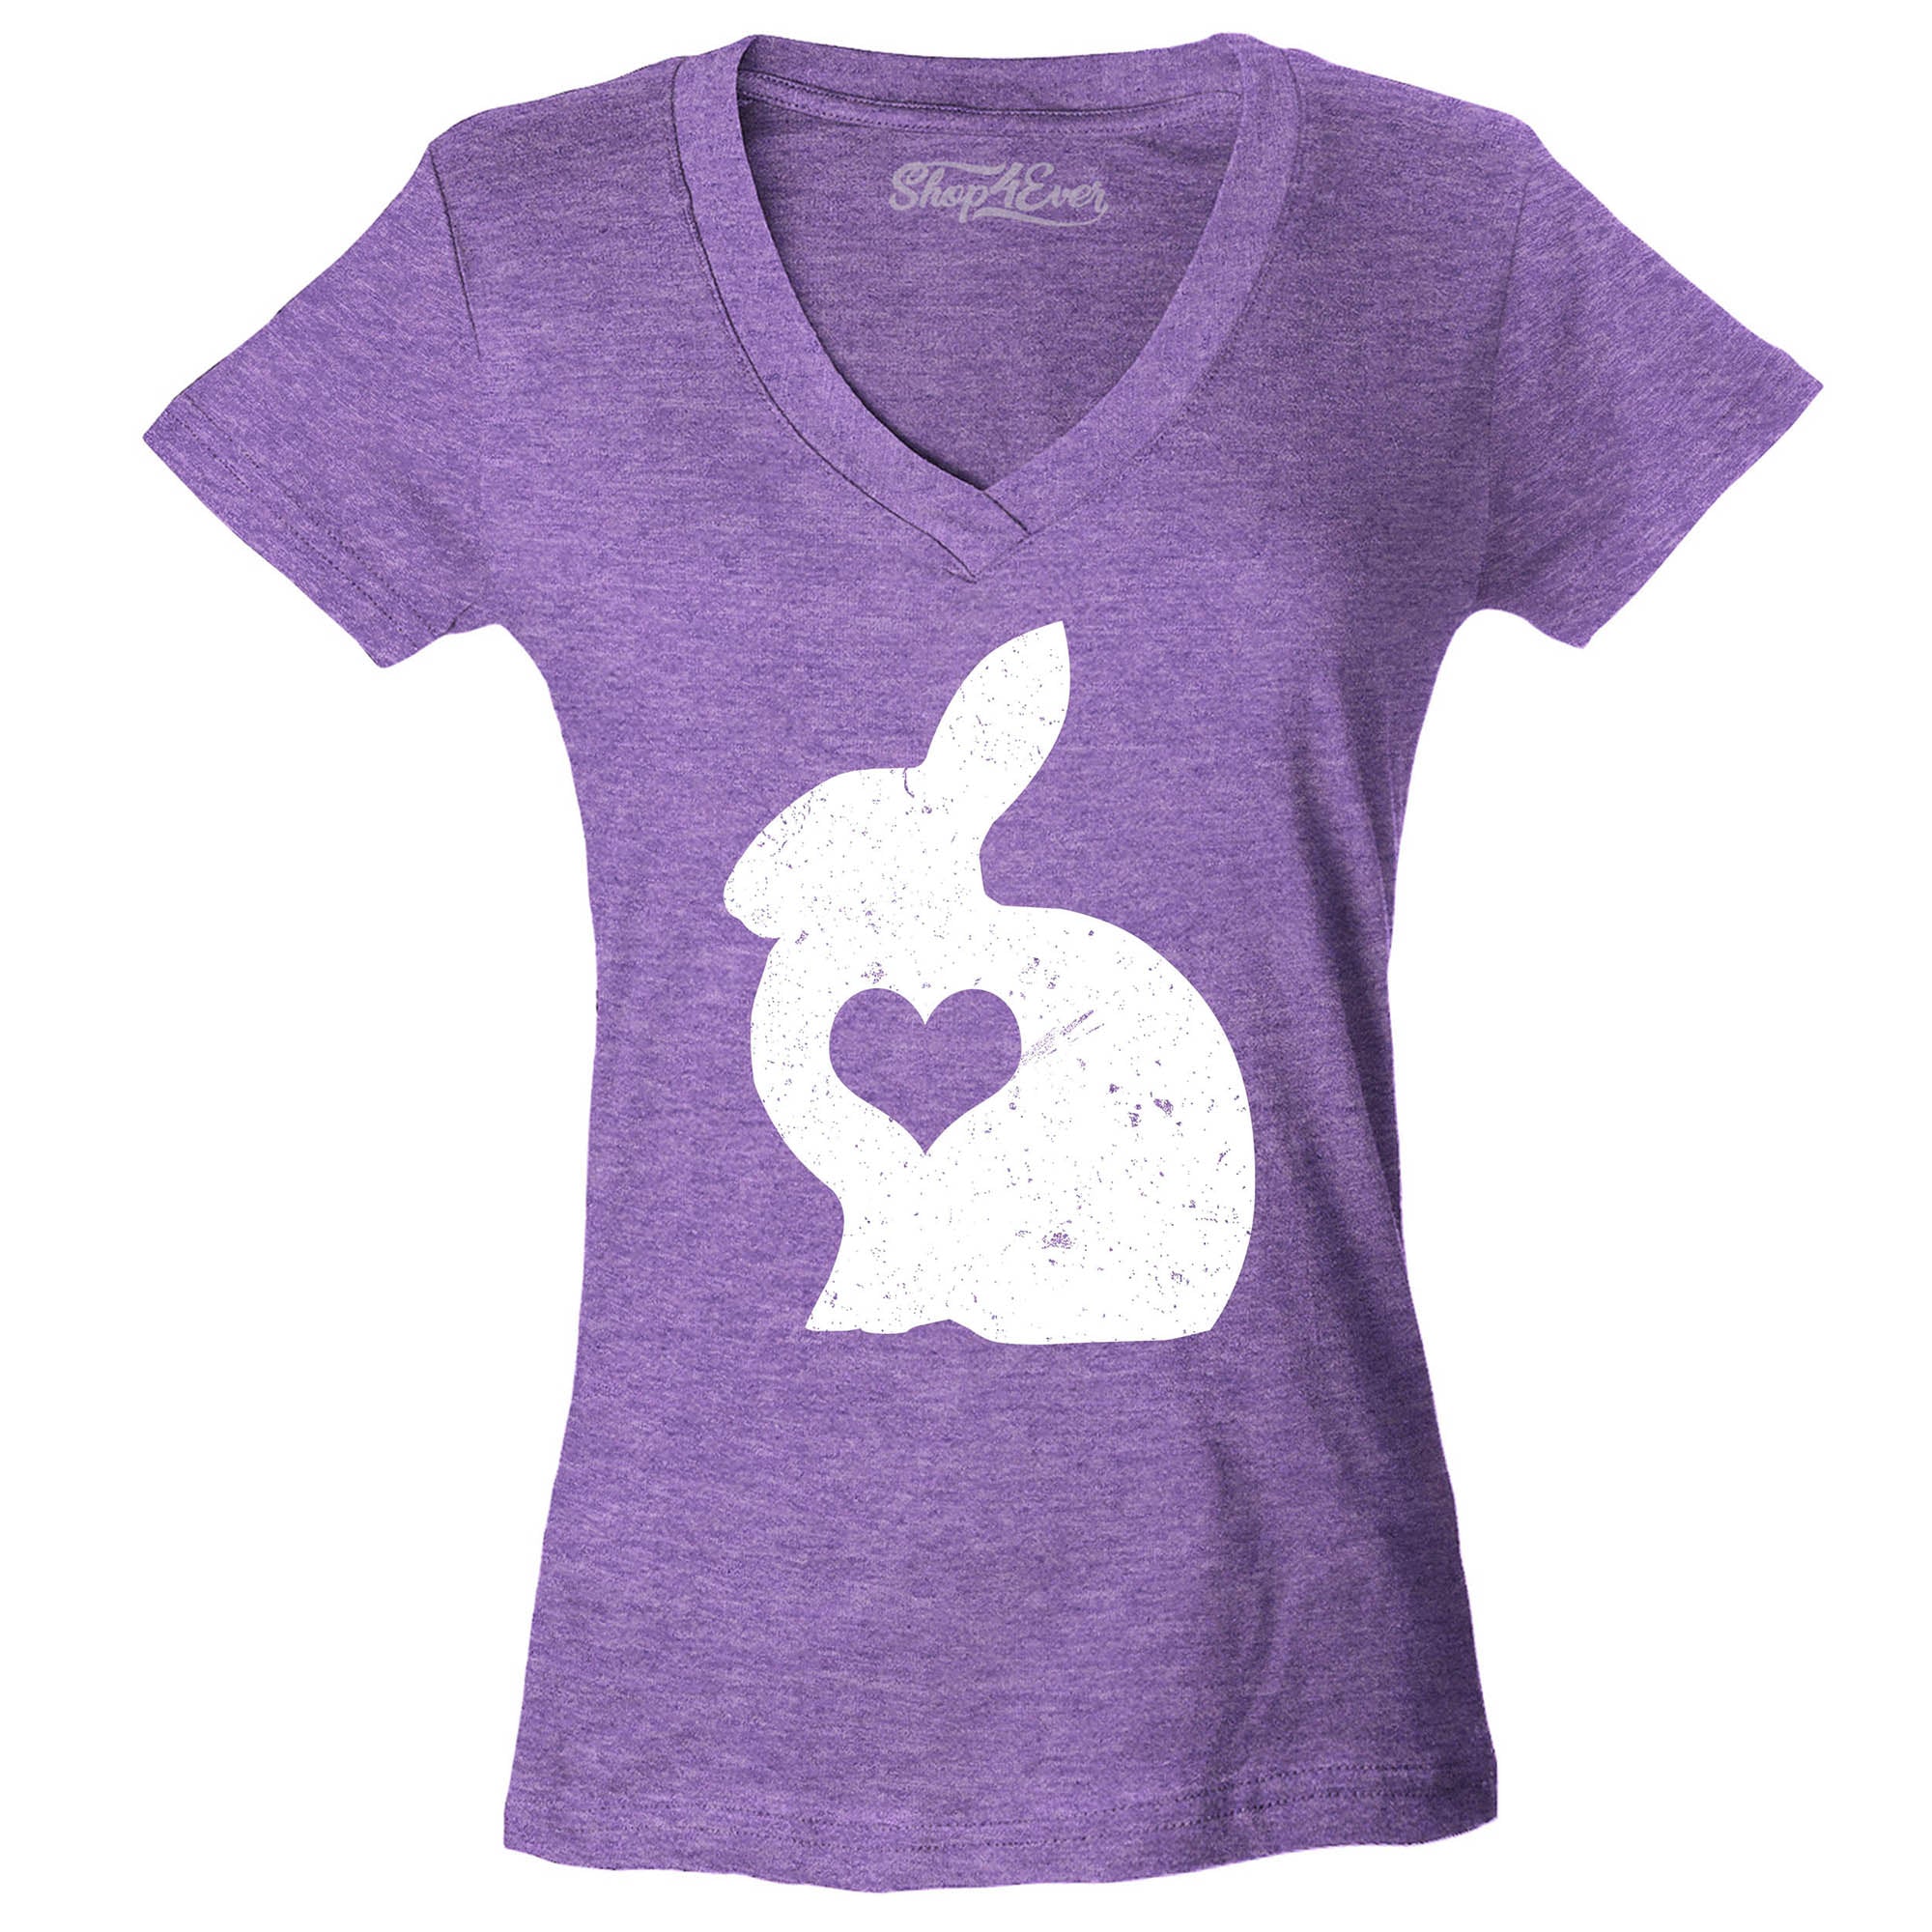 Easter Bunny Rabbit with Heart Women's V-Neck T-Shirt Slim Fit